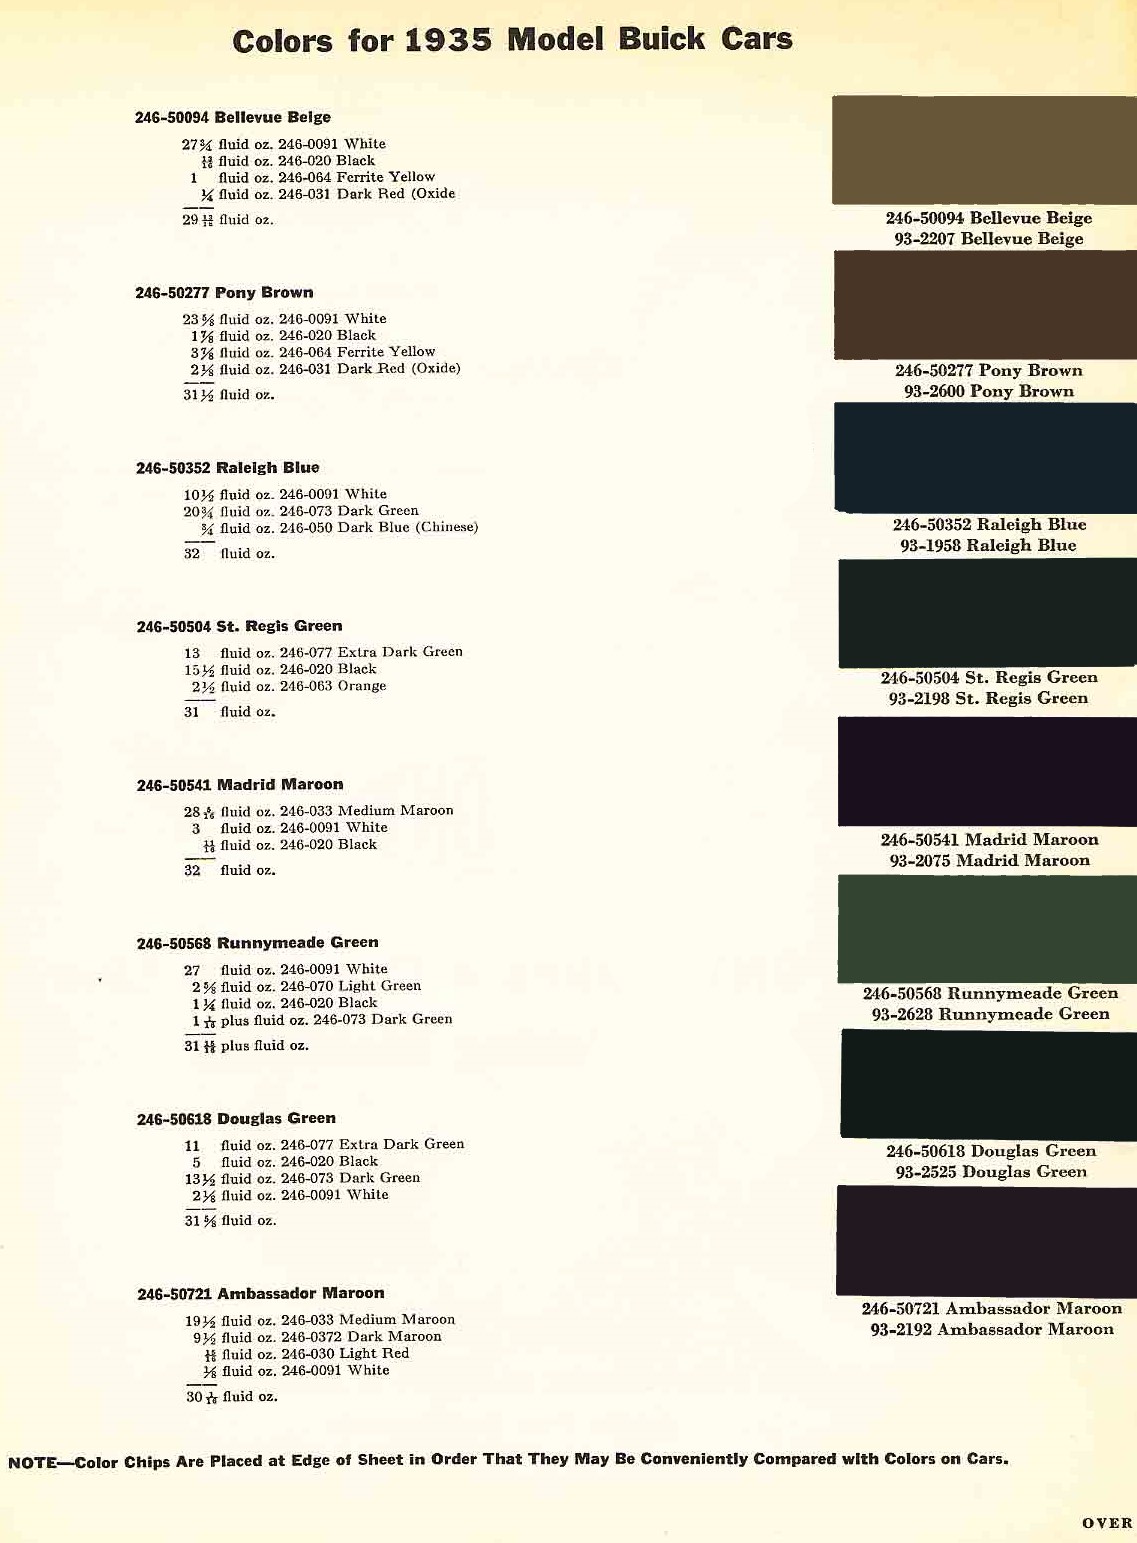 Paint Codes and Colors used on Buick in 1935